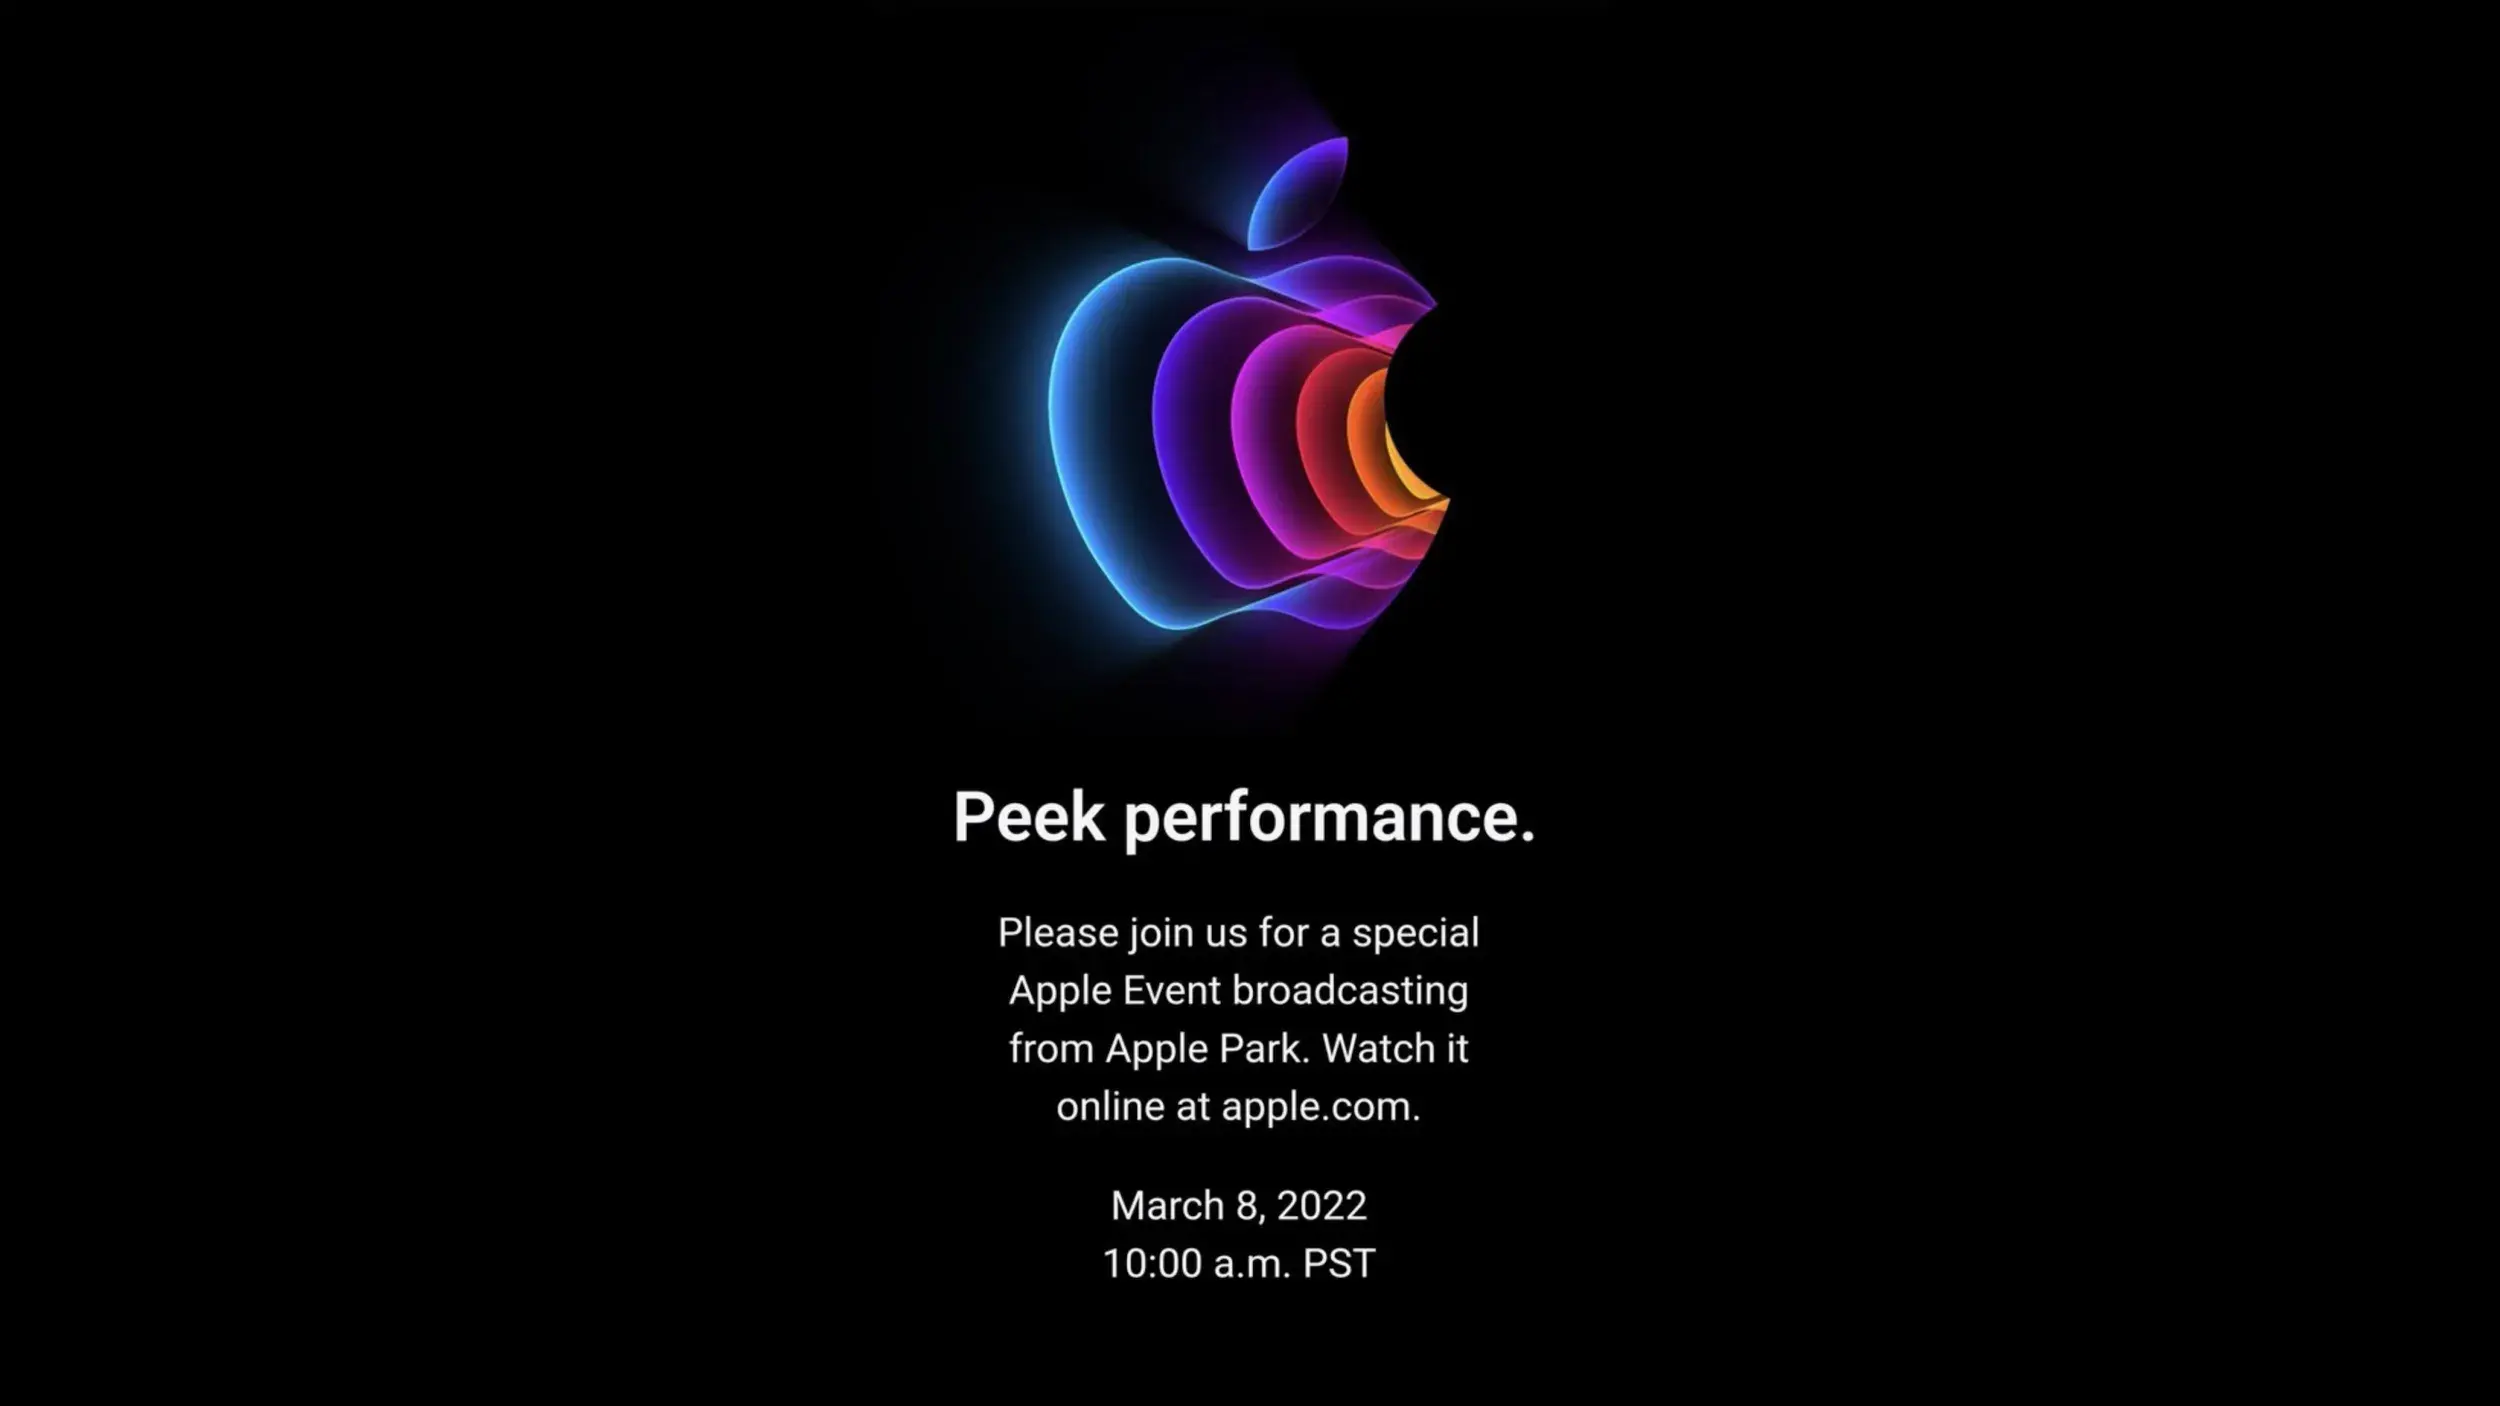 Maybe the tagline for Apple's last event should've been saved for September 2022?  - iPhone 14 to be iPhone 13S: Steve Jobs' masterpiece reaches peak, but Apple makes the Max out of it